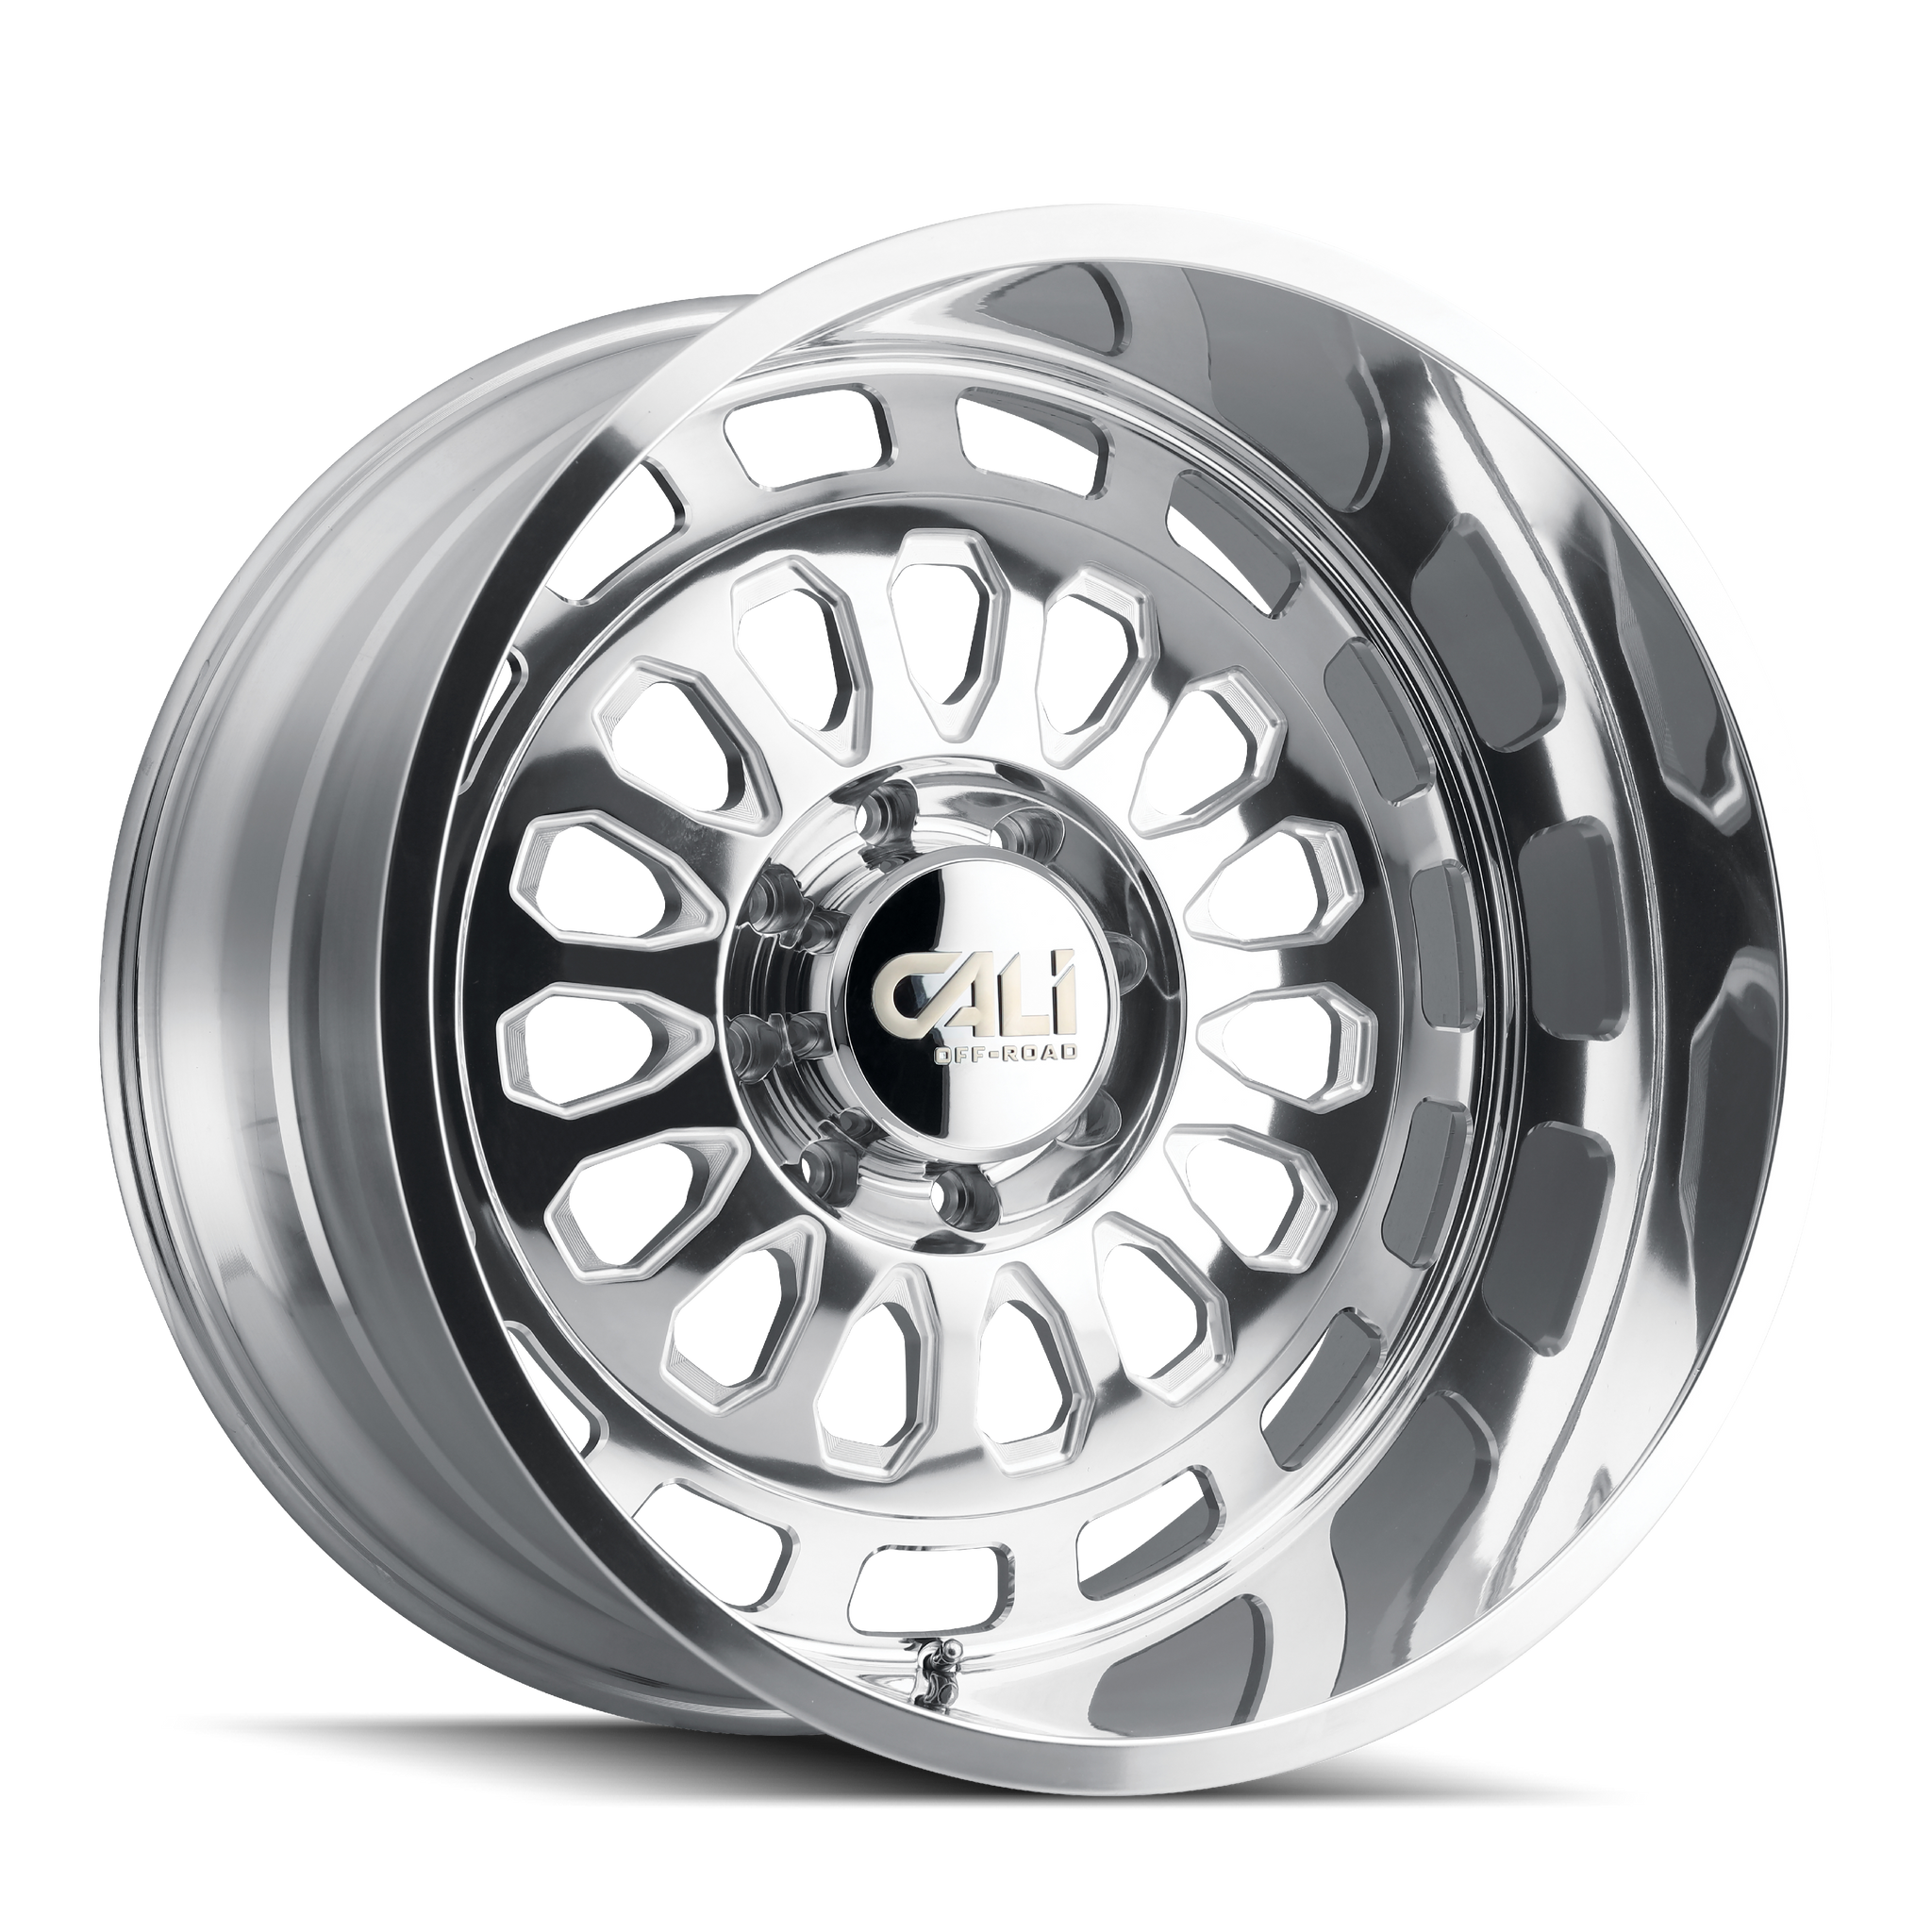 CALI OFF-ROAD PARADOX 9113 20X10 -25MM 8x165.1 125.2MM POLISHED/MILLED SPOKES